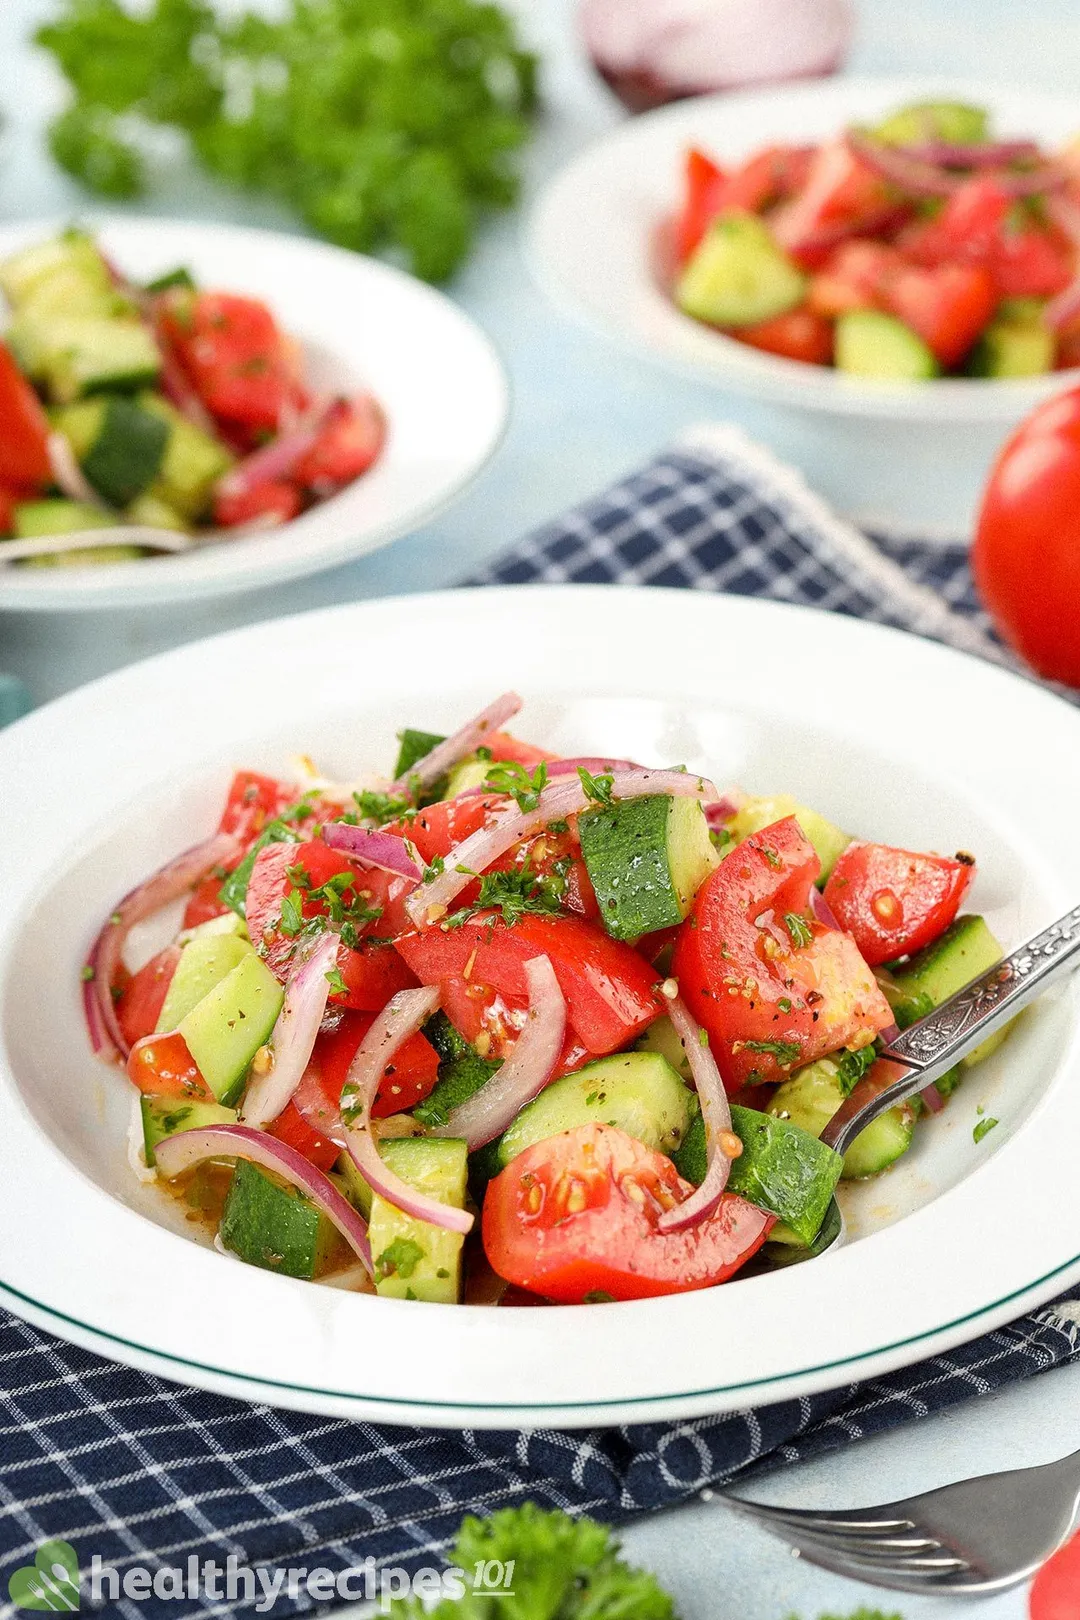 Plates of cucumber tomato salad, consisting of pieces of tomato, cucumber, red onion, and chopped parsley